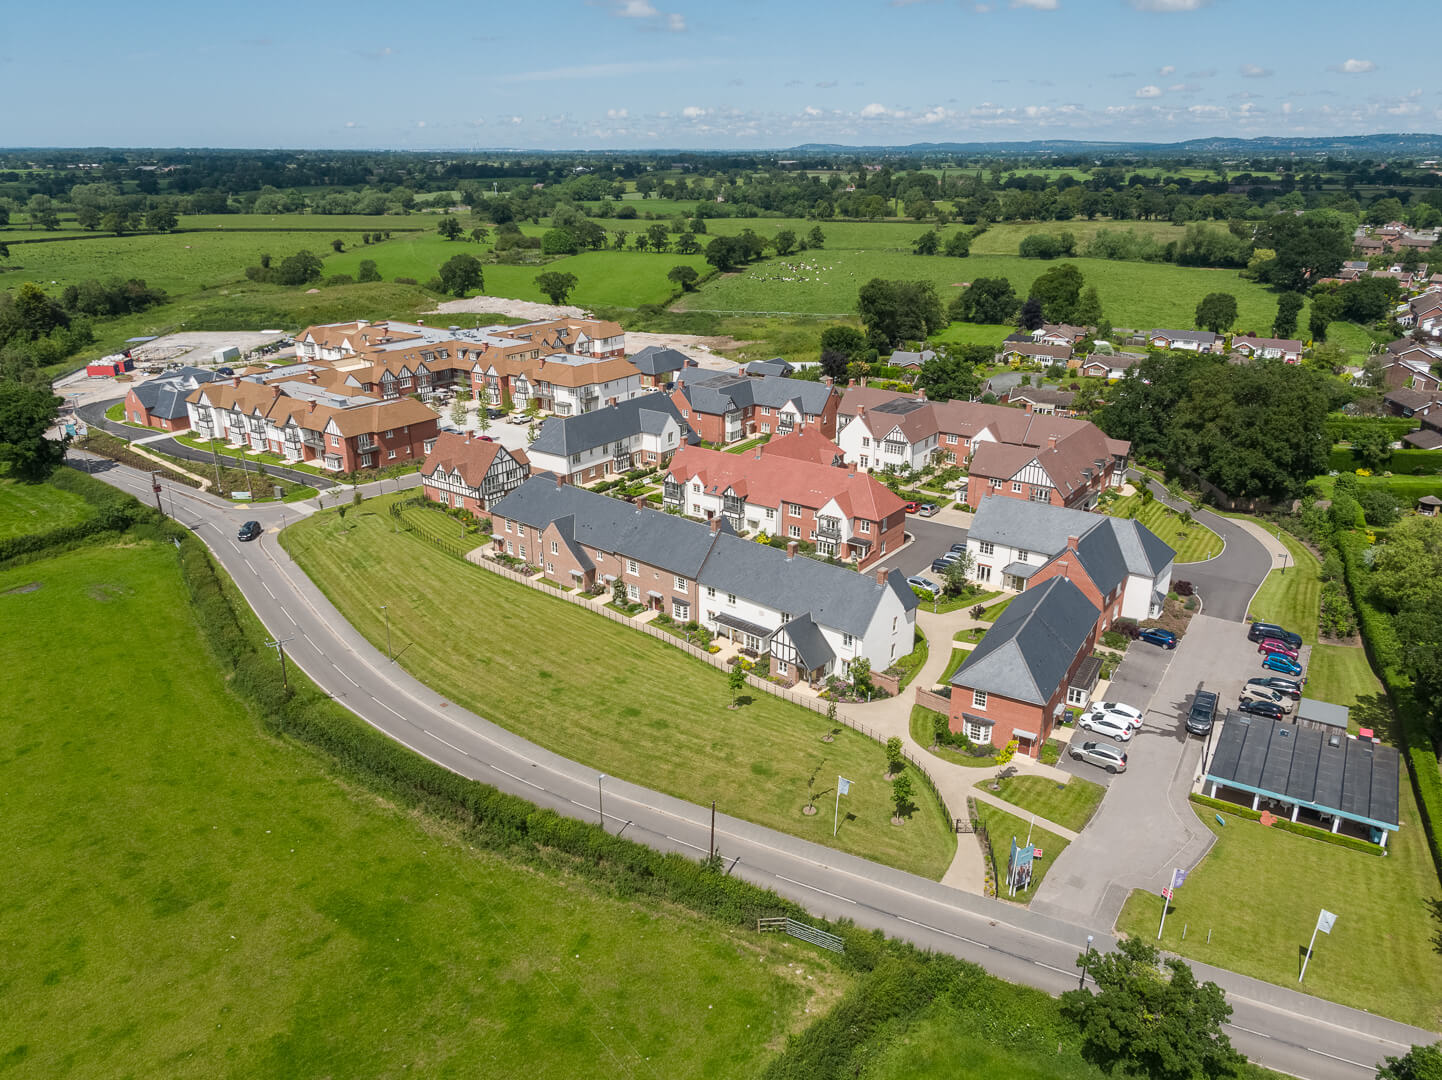 Midi Photography - Aerial drone photography at Tattenhall Retirement Village, Cheshire for Seddon Construction